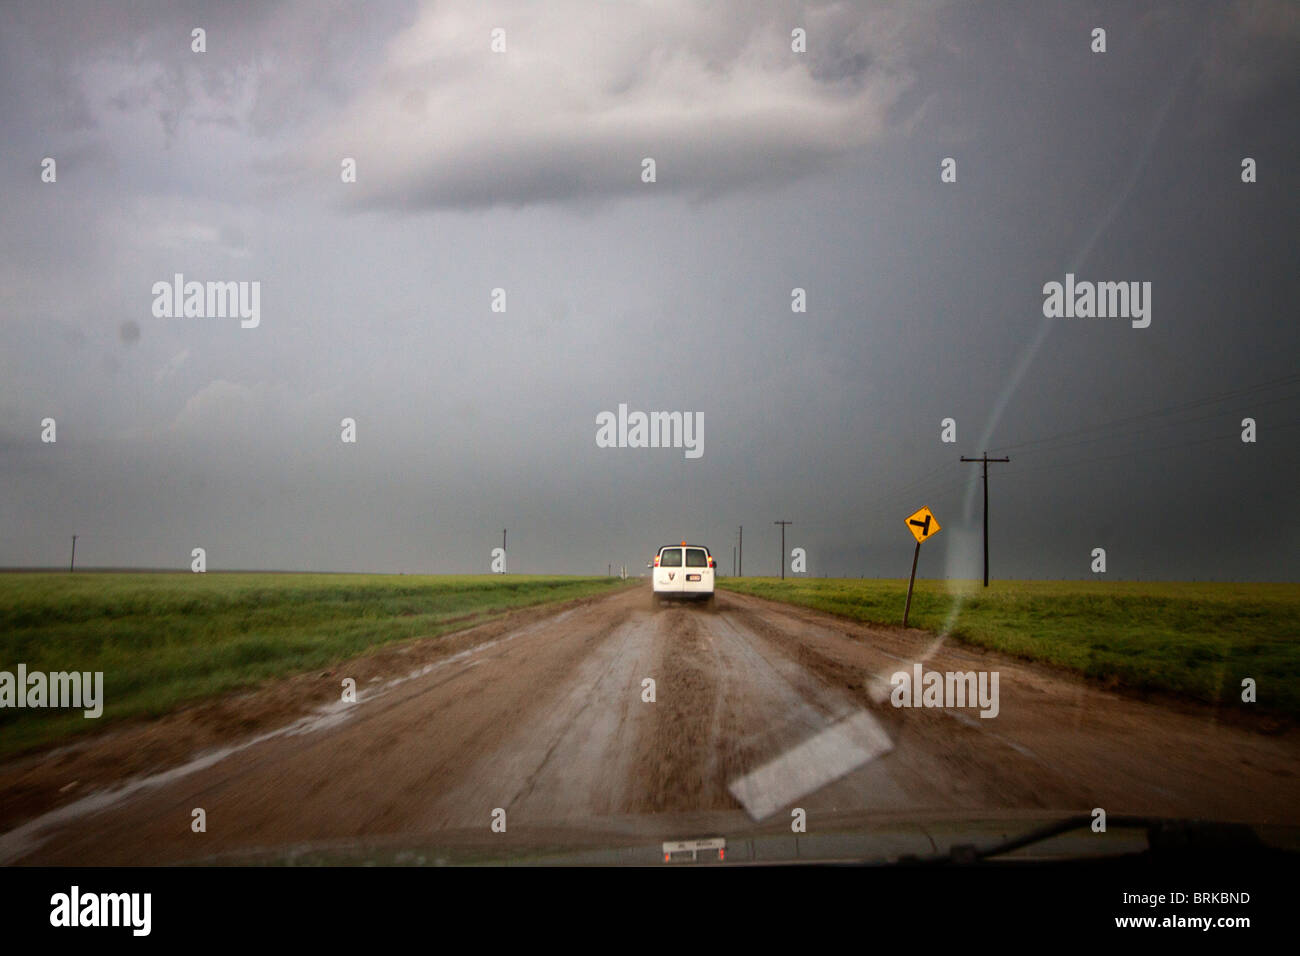 View form the dash of a storm chaser's vehicle as he slogs through deep mud during a thunderstorm in Kansas, May 23, 2010. Stock Photo